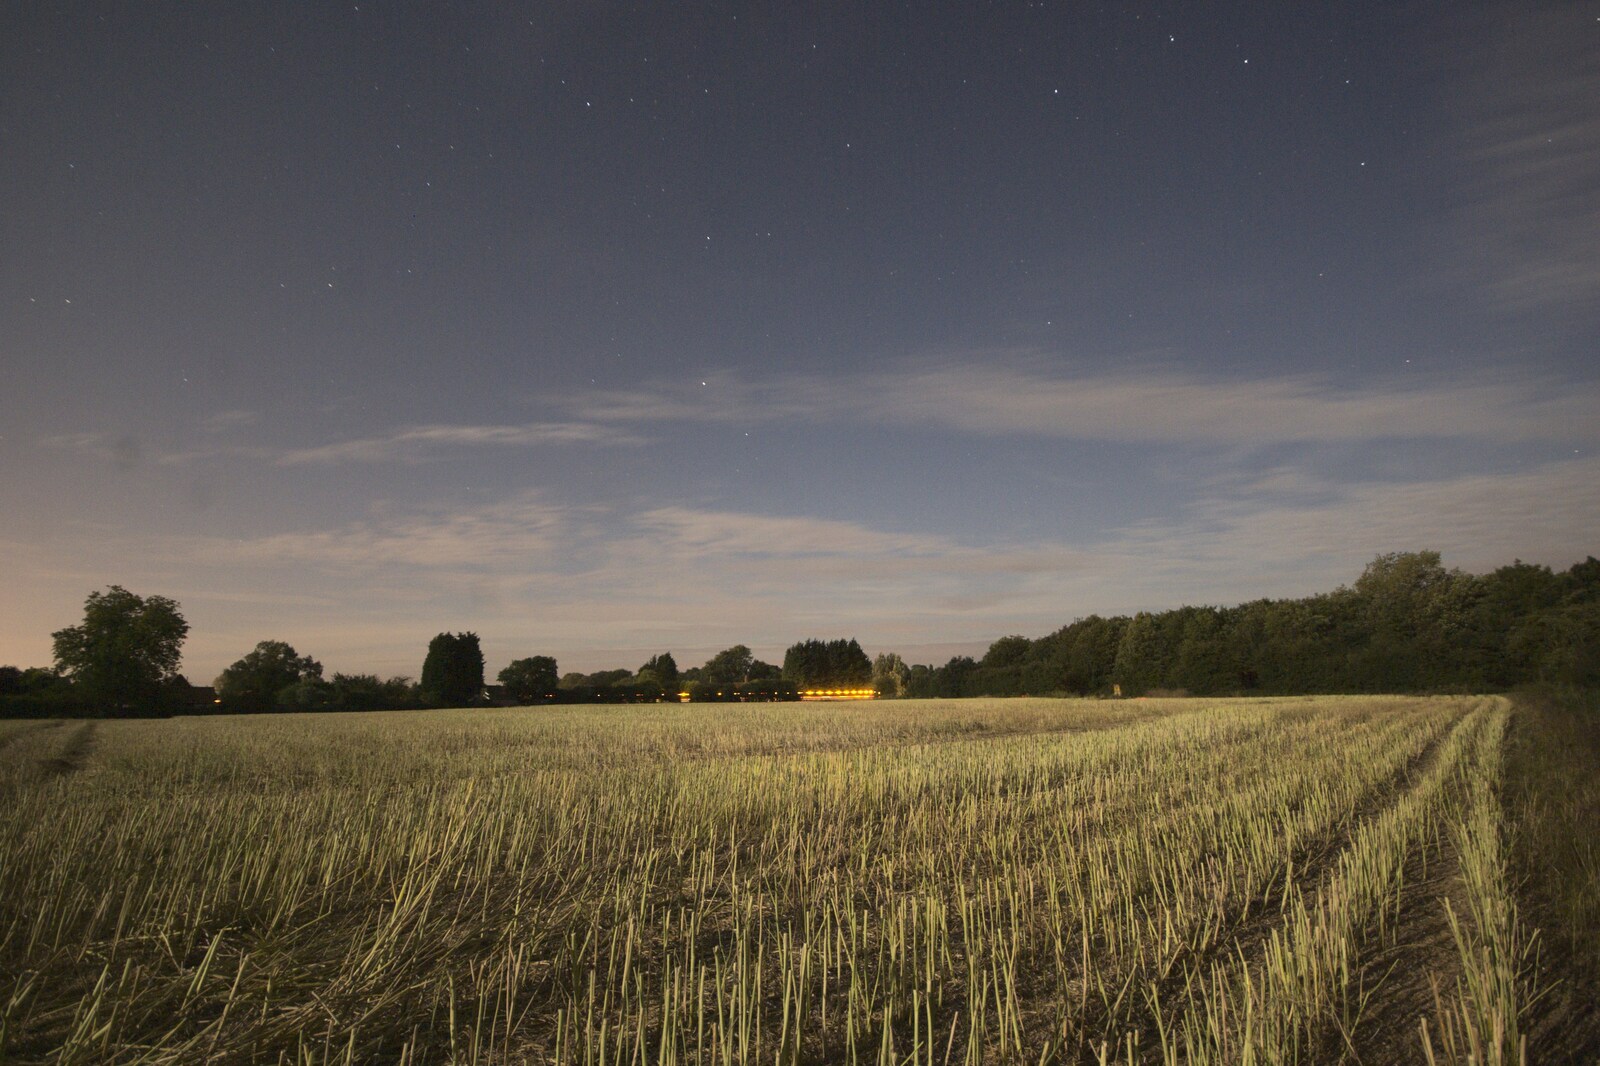 Oilseed stubble in the moonlight from New Kittens and Moonlit Fields, Brome, Suffolk - 11th August 2009